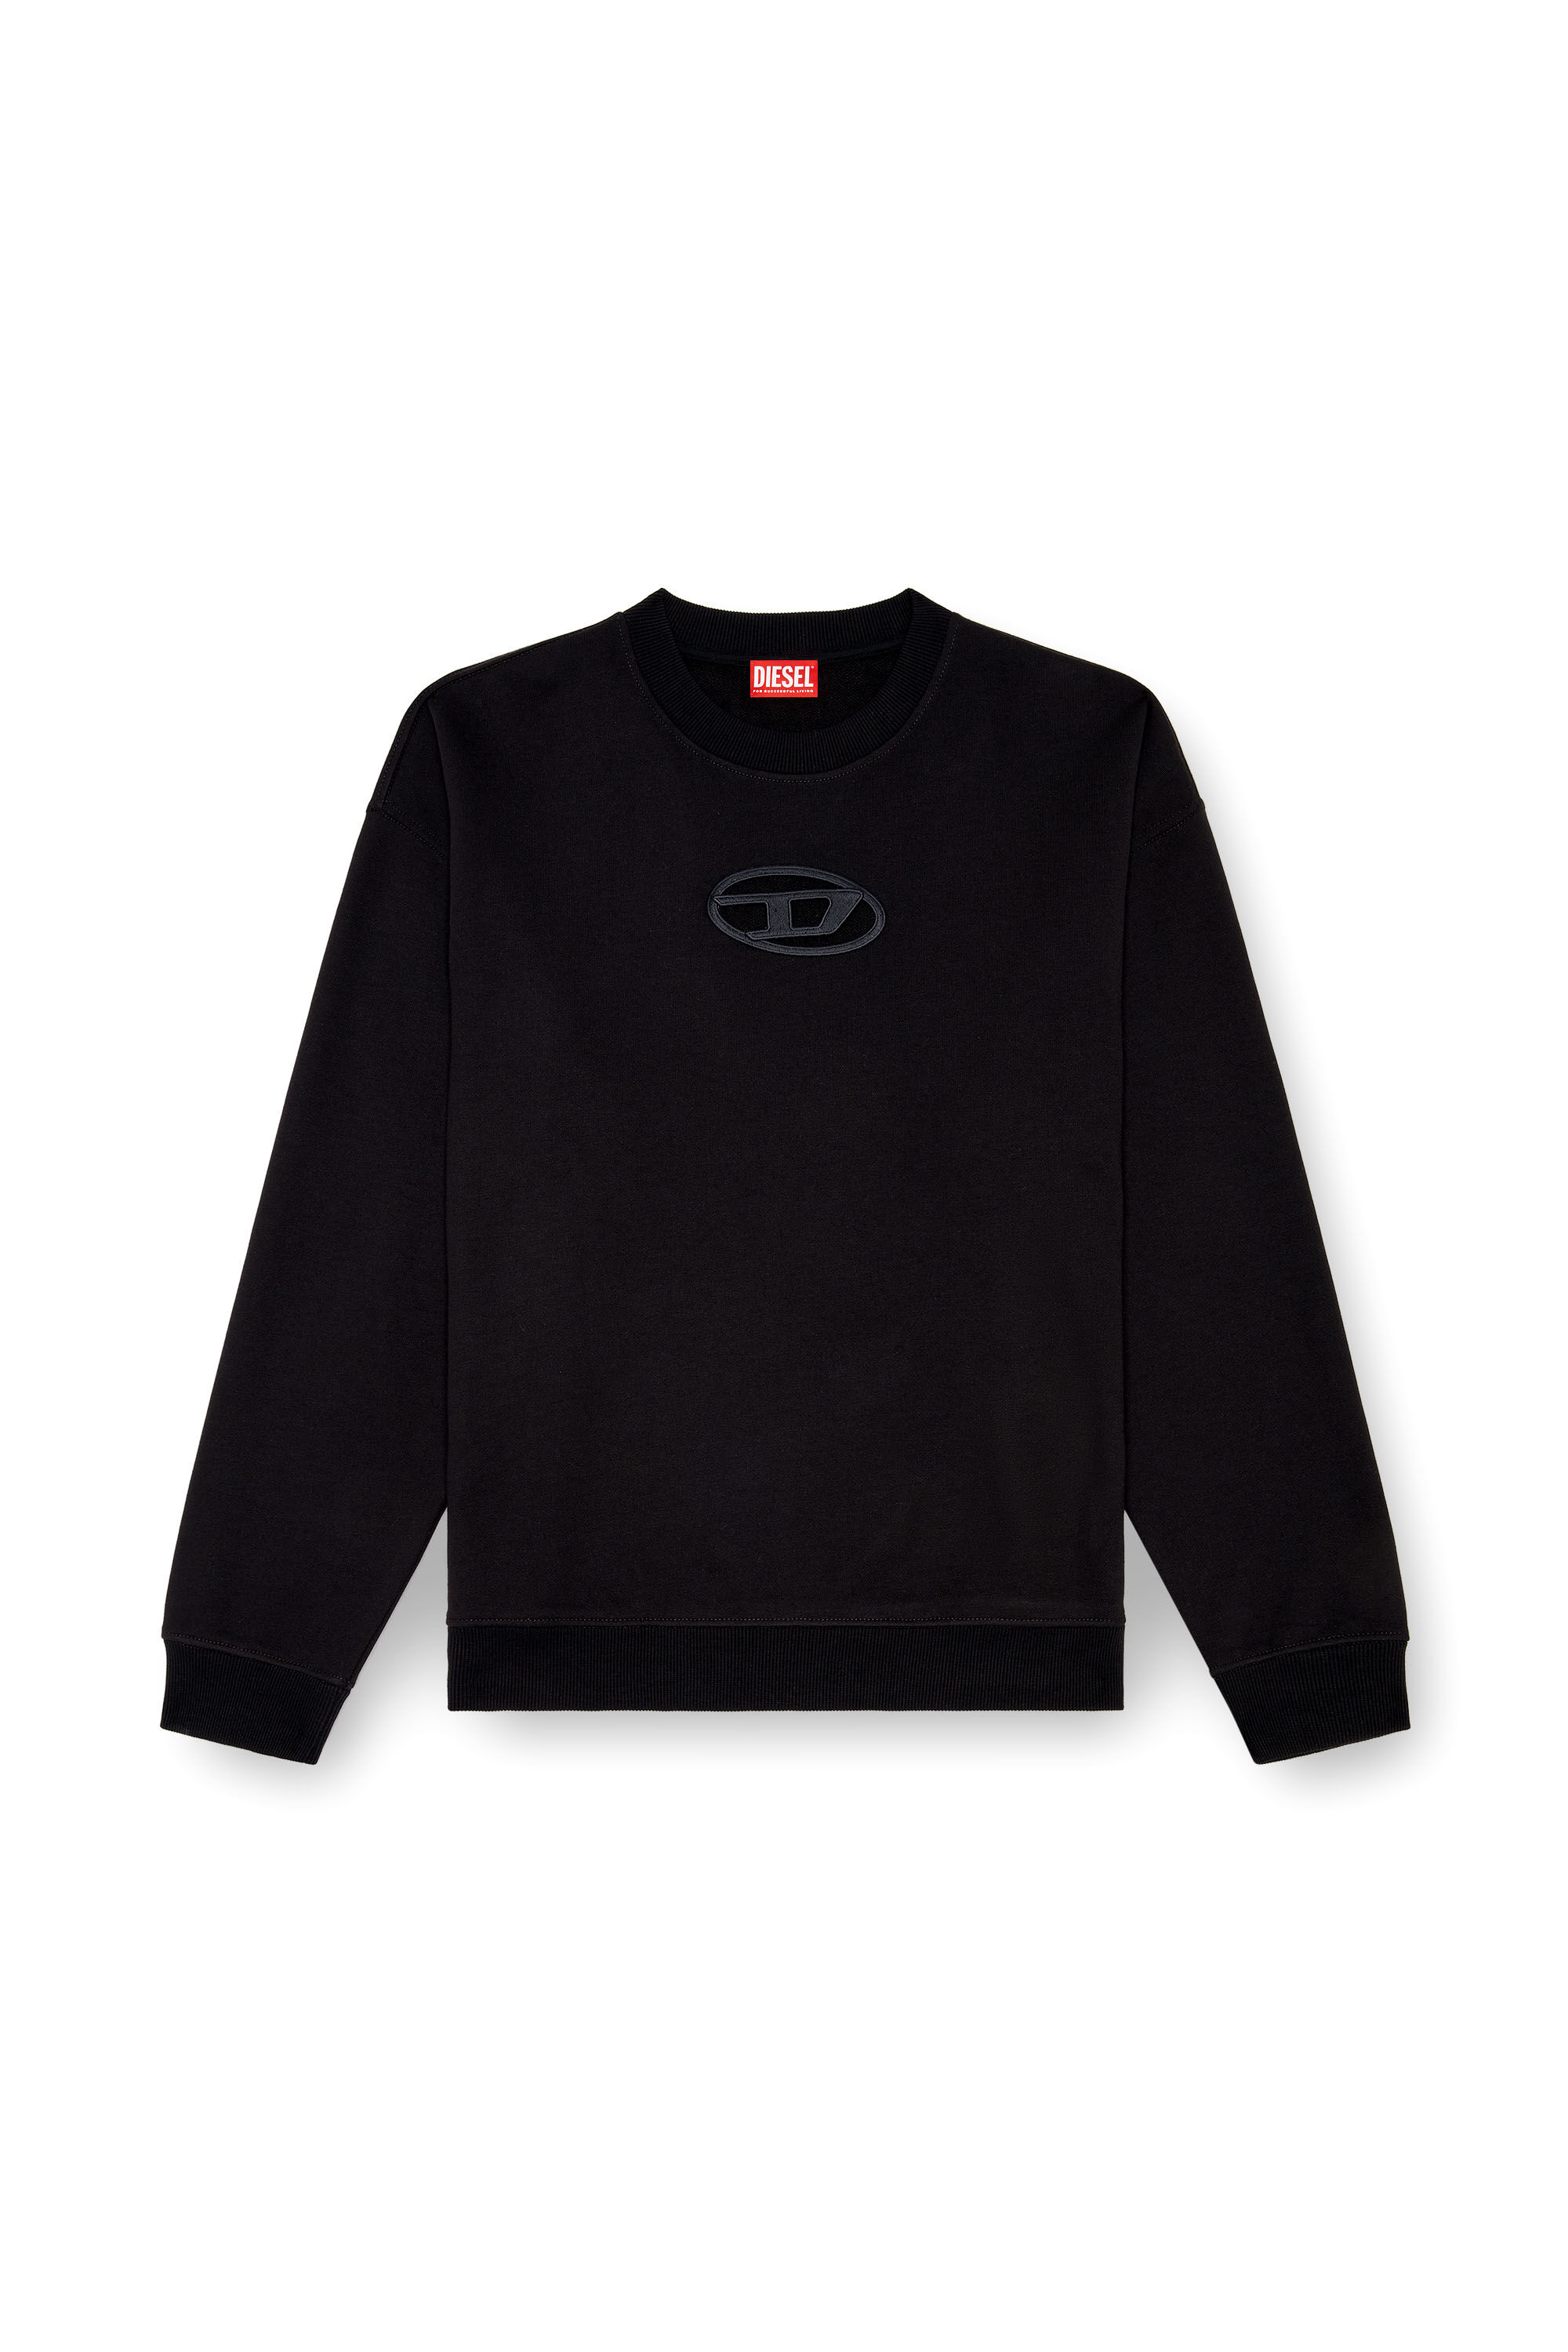 Diesel - S-BOXT-OD, Man Sweatshirt with cut-out Oval D logo in Black - Image 2